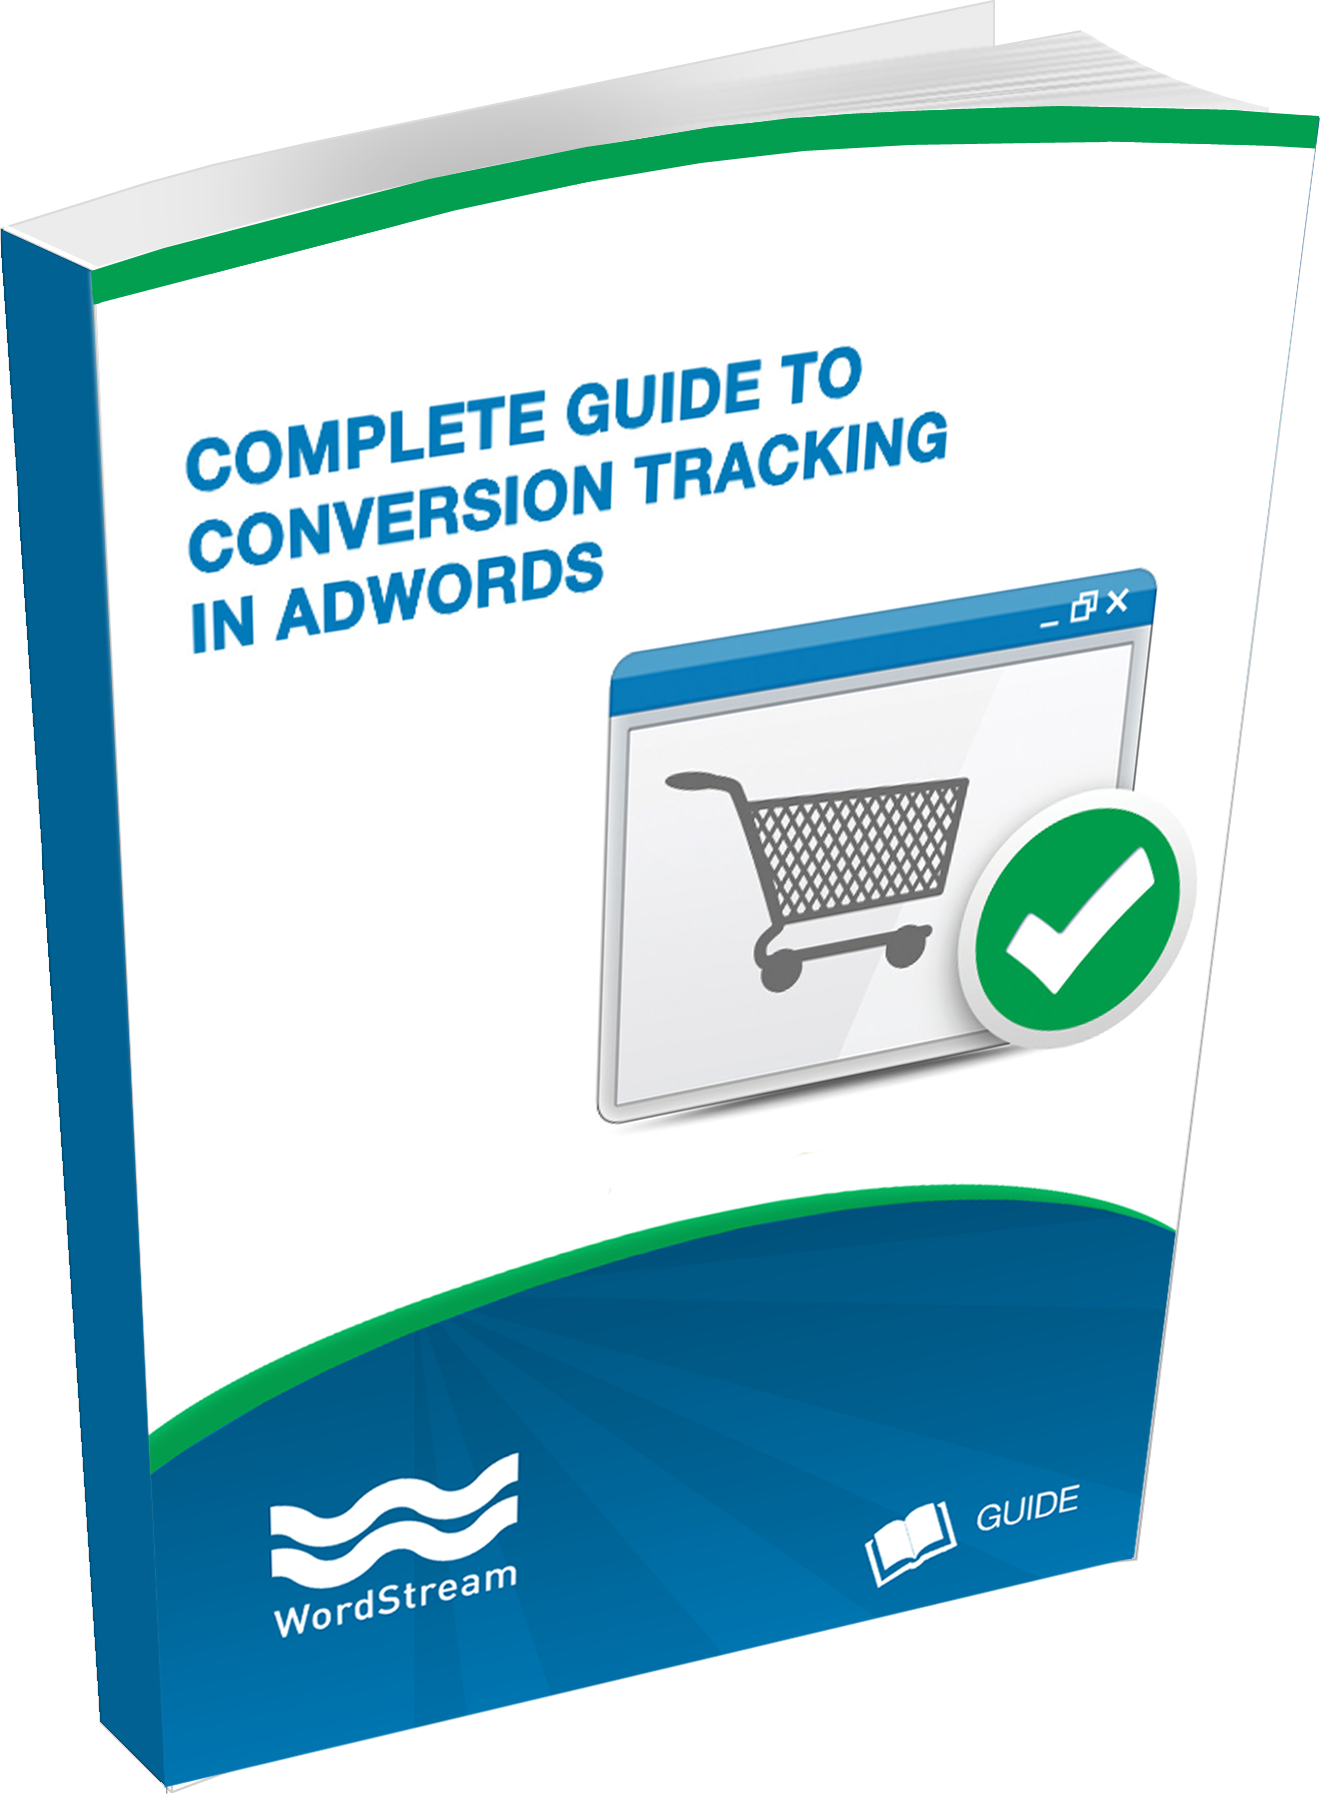 Complete Guide to AdWords Conversion Tracking